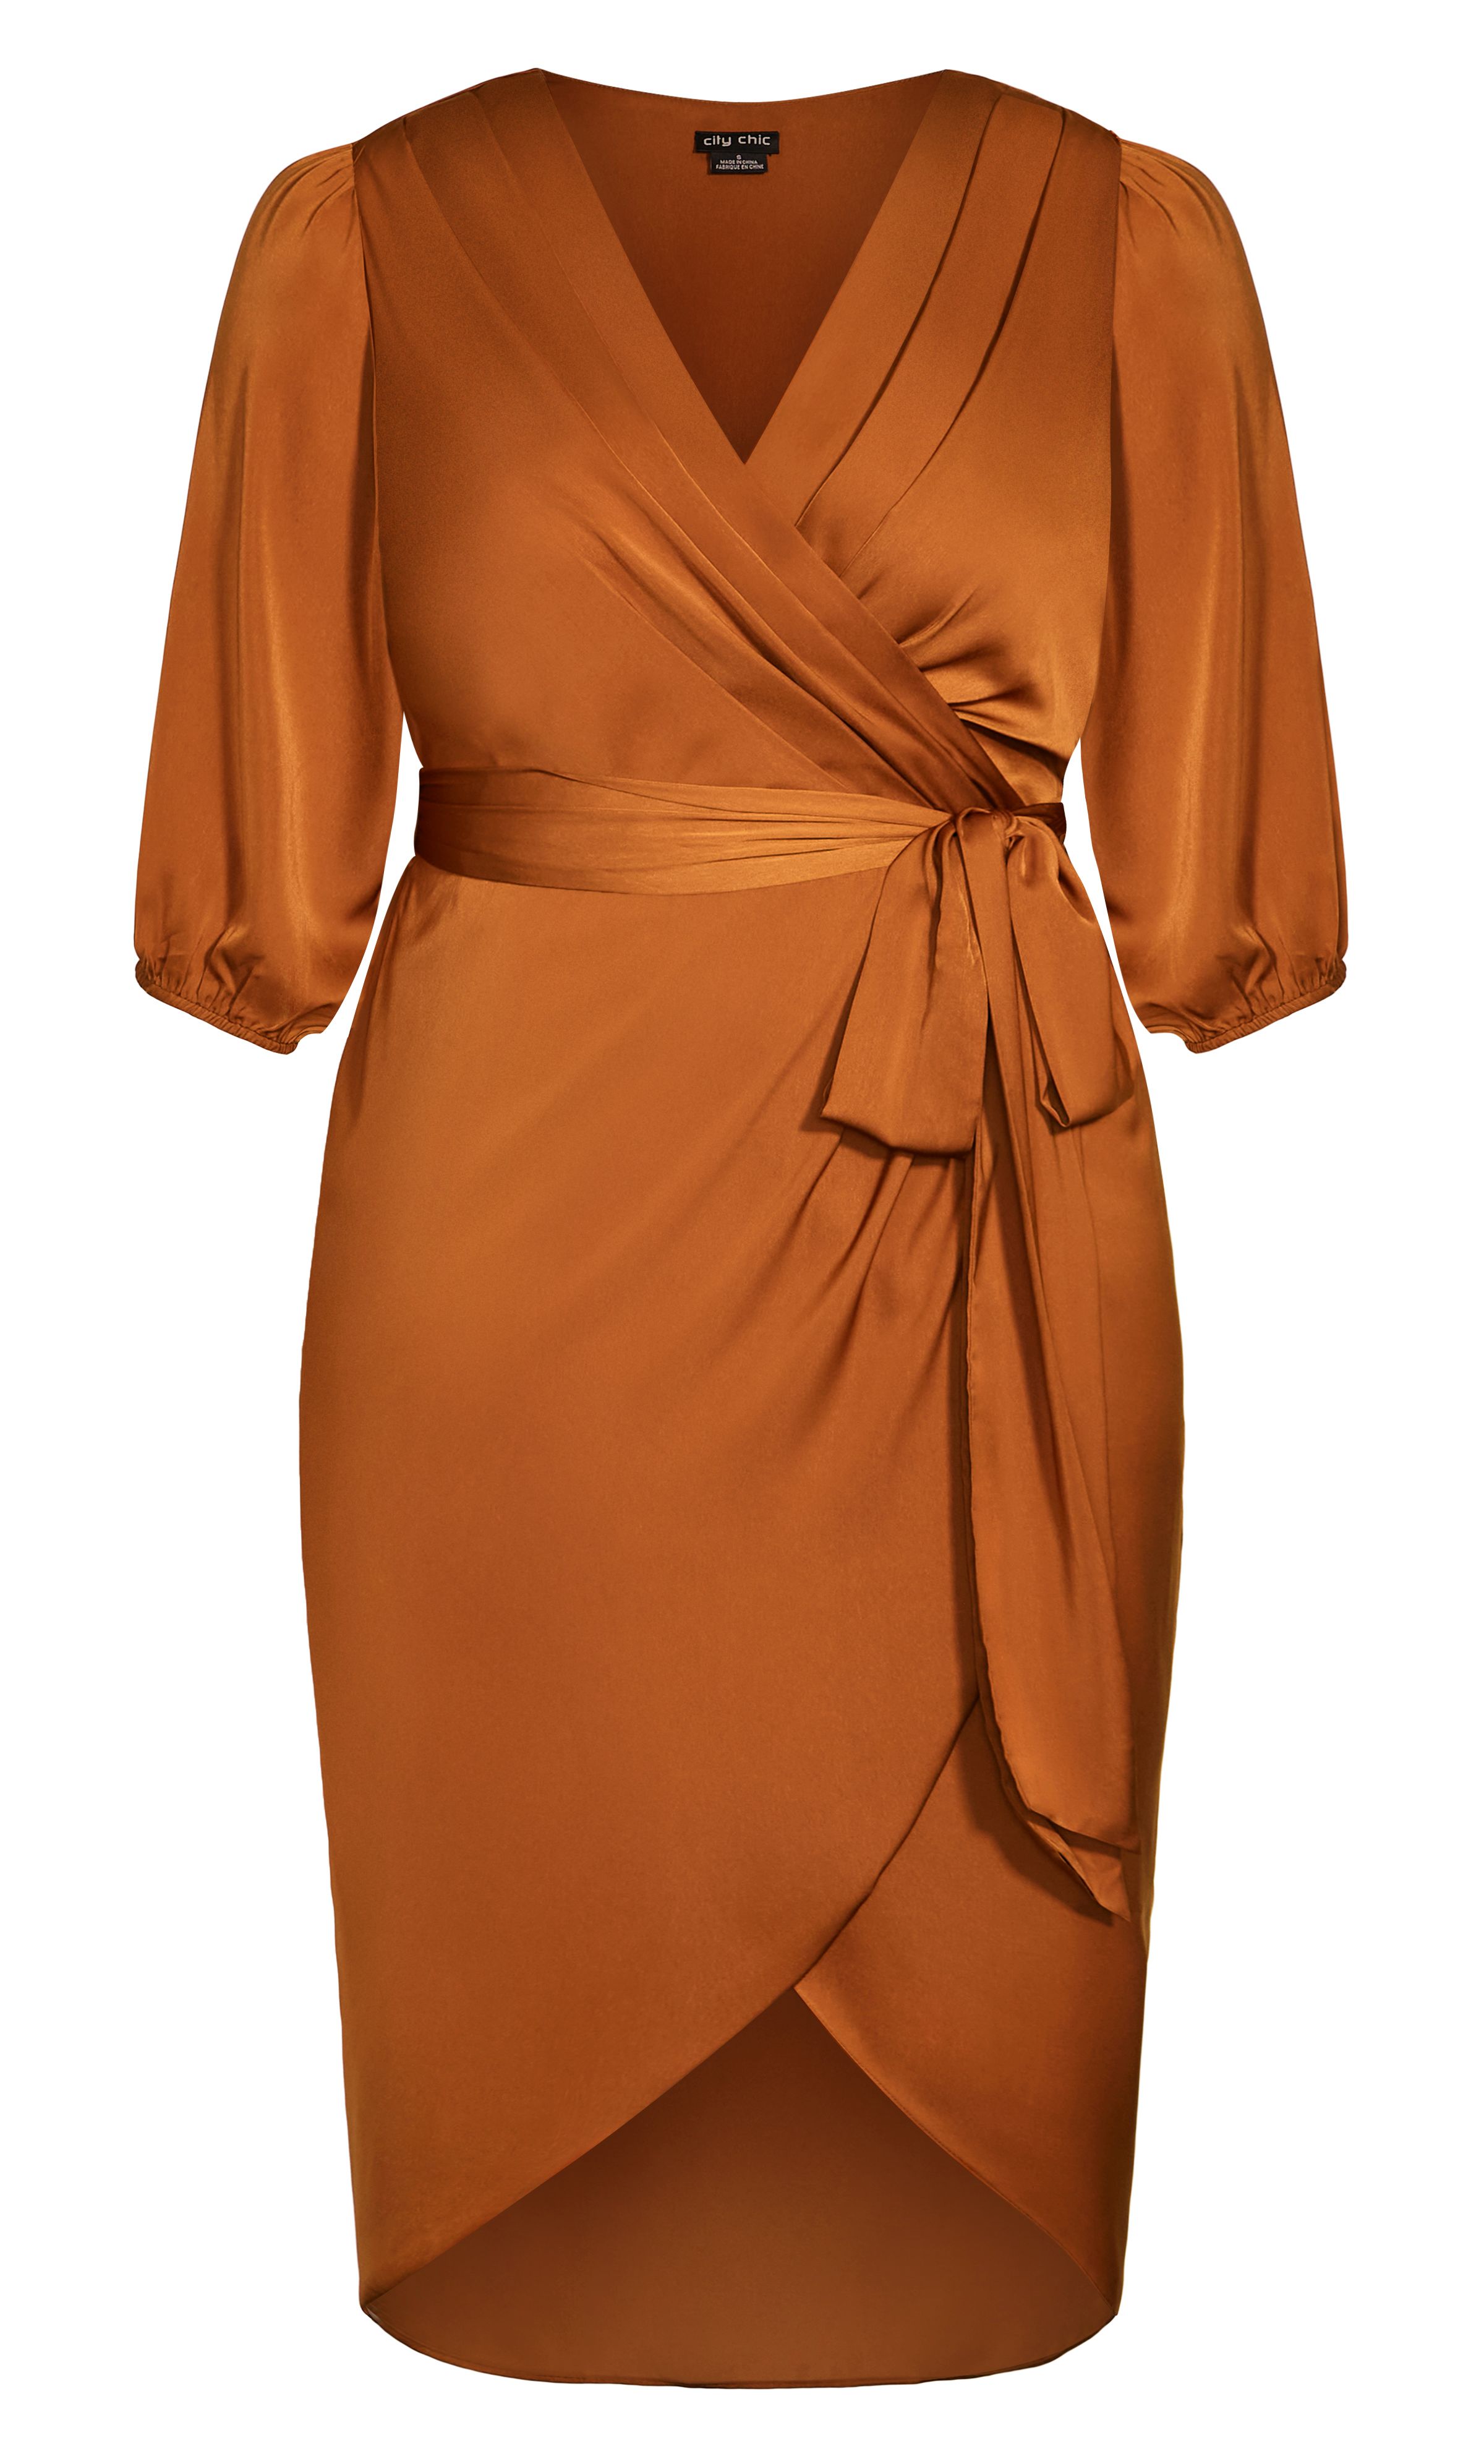 Drape your curves in the luxurious silhouette of our Opulent Elbow Sleeve Dress, dipped in a glamorous caramel hue. This seriously elegant ensemble offers a faux wrap appearance with puffed sleeves and a sweet tulip hem. Key Features Include: - Faux wrap V-neckline - Elbow length puff sleeves with elasticated cuff - Removable self-tie waist belt - Half-elasticated waist - Lined skirt - Luxurious shiny satin fabrication - Pullover style - Midi length tulip hemline Try adding some gold accessories for some extra 'oomph'! A pair of strappy heels and delicate jewellery should do just the trick.